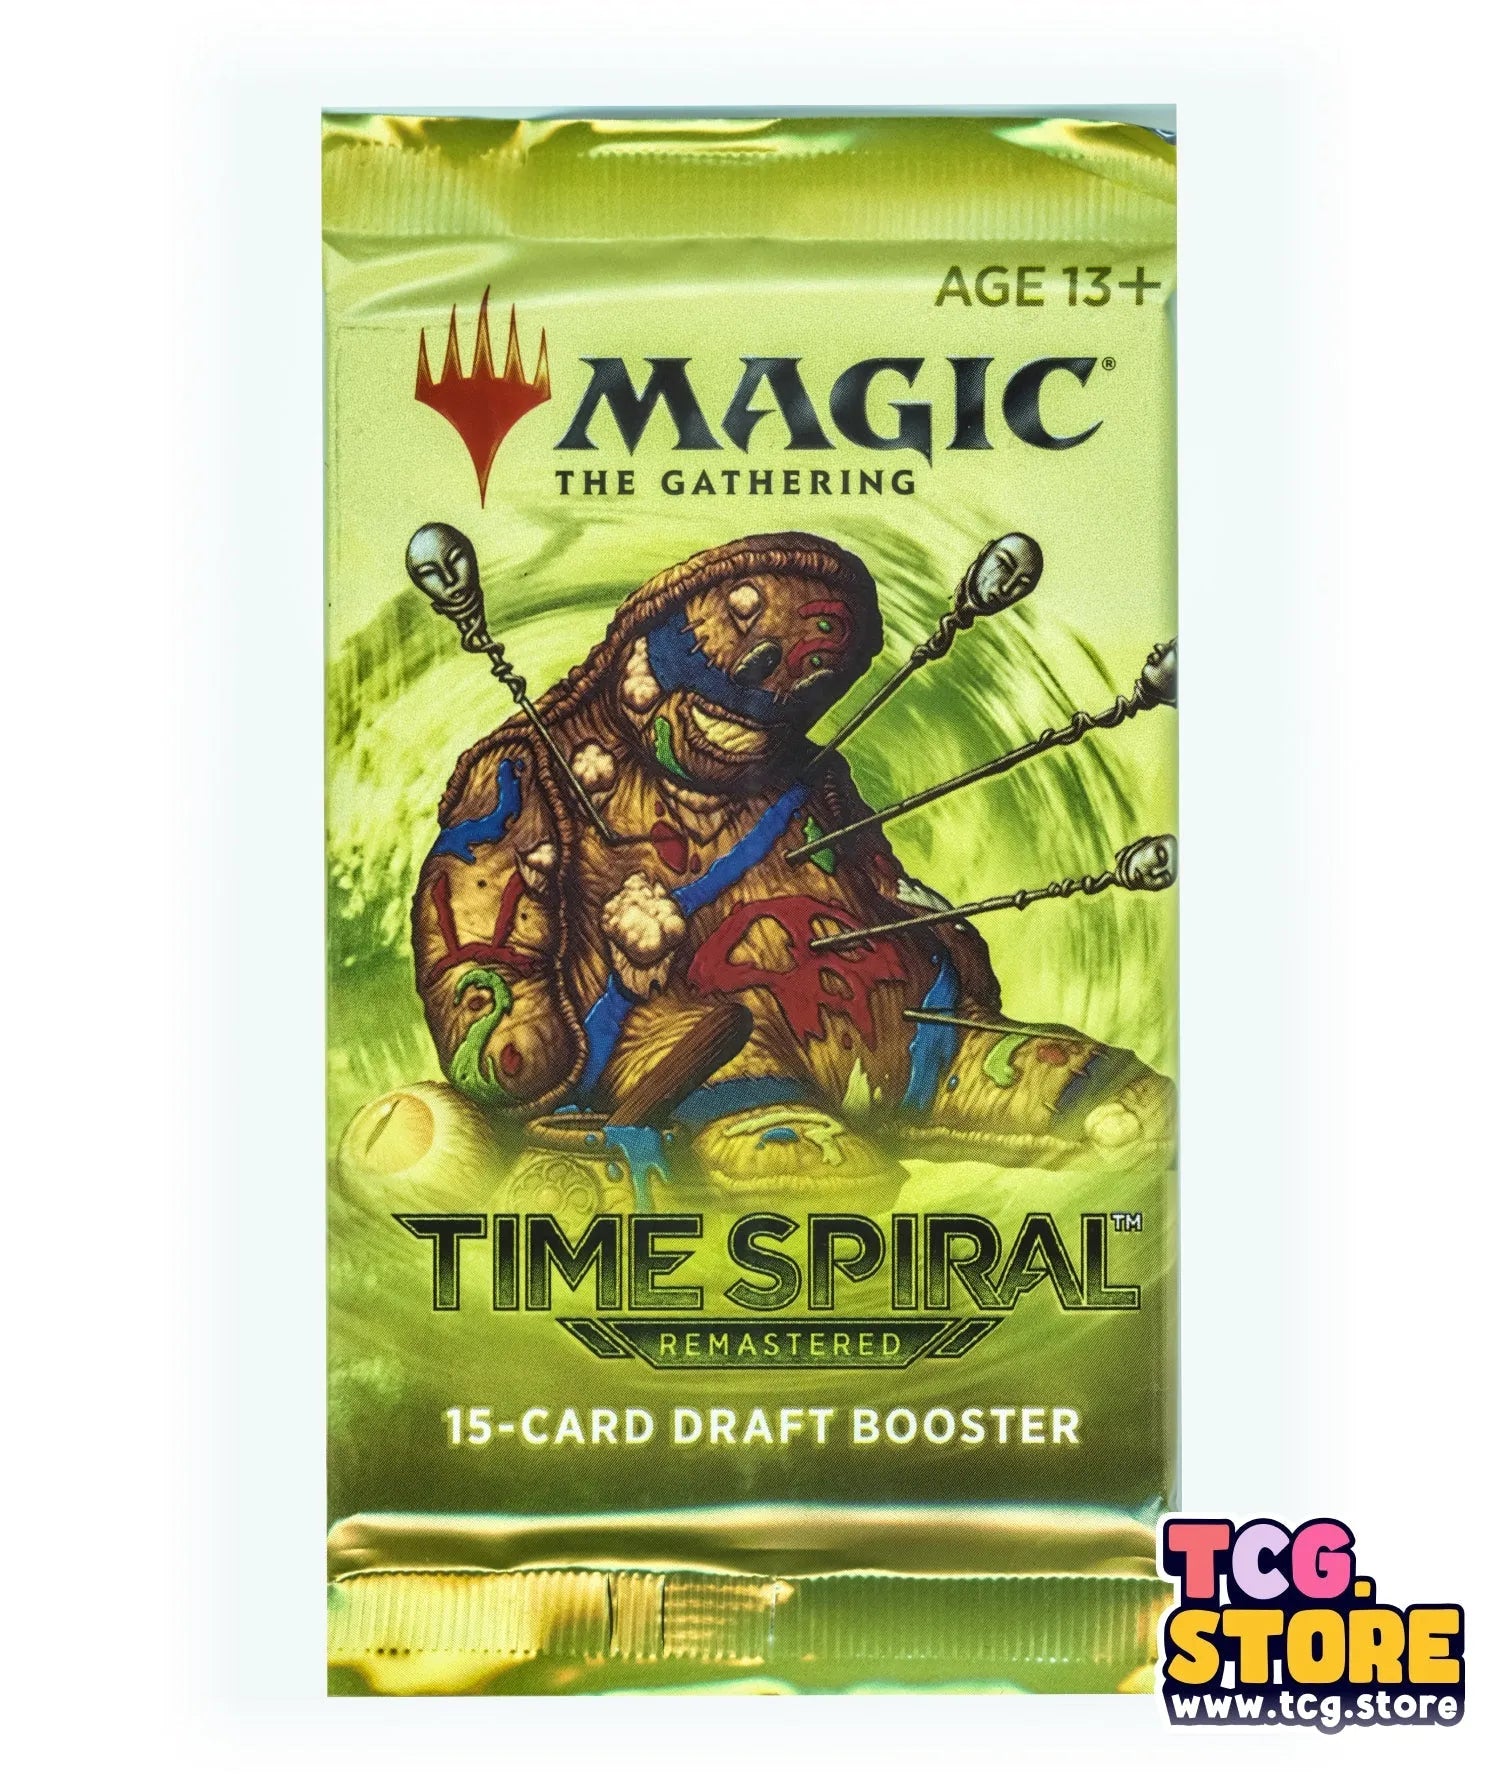 1 Pack - Magic: The Gathering - Time Spiral: Remastered Draft Pack (15 cards) - Sealed - TCG.Store